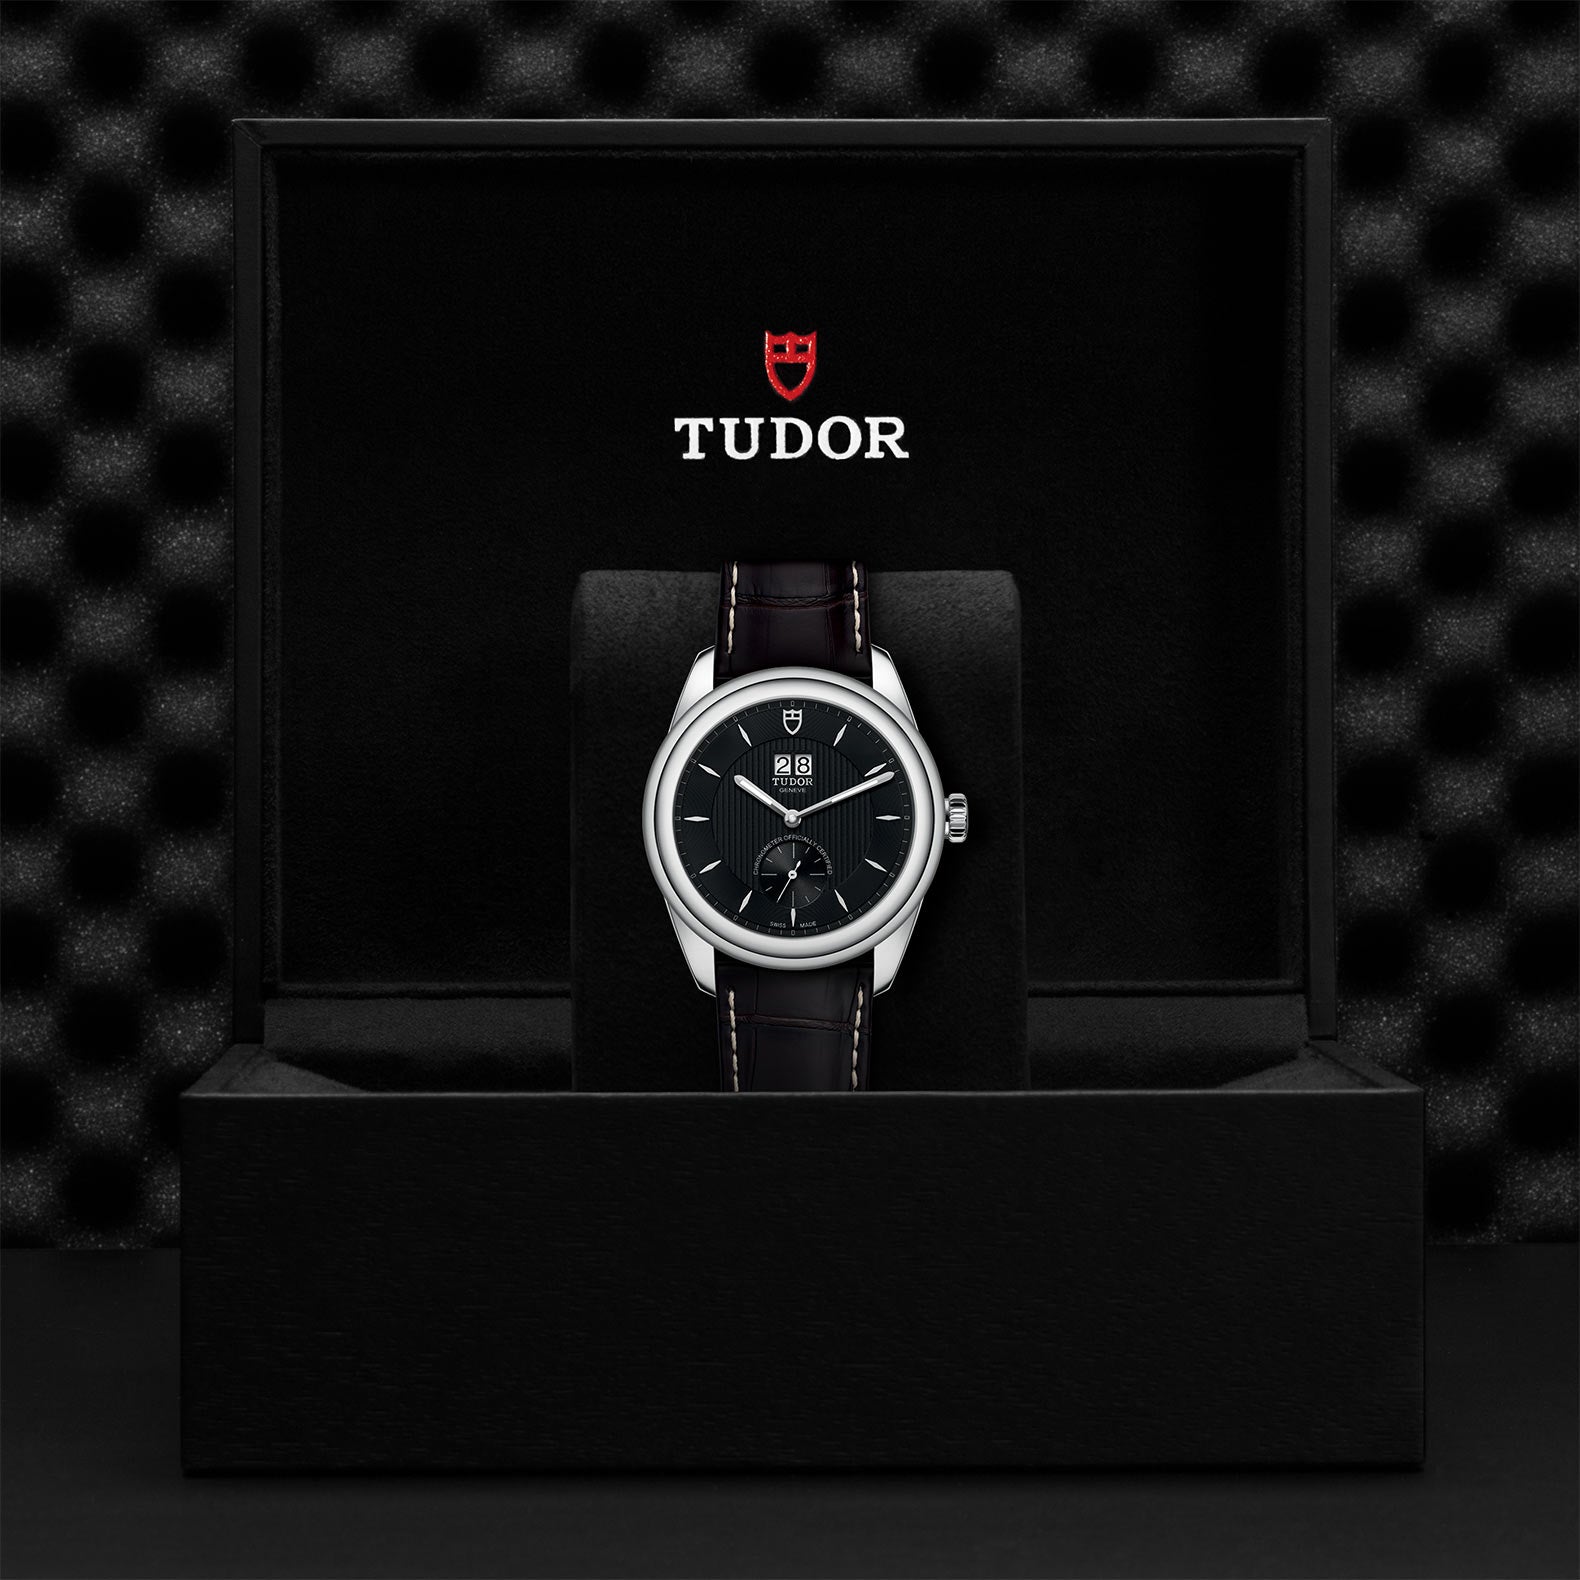 TUDOR Glamour Double Date, model #M57100-0018, at IJL Since 1937